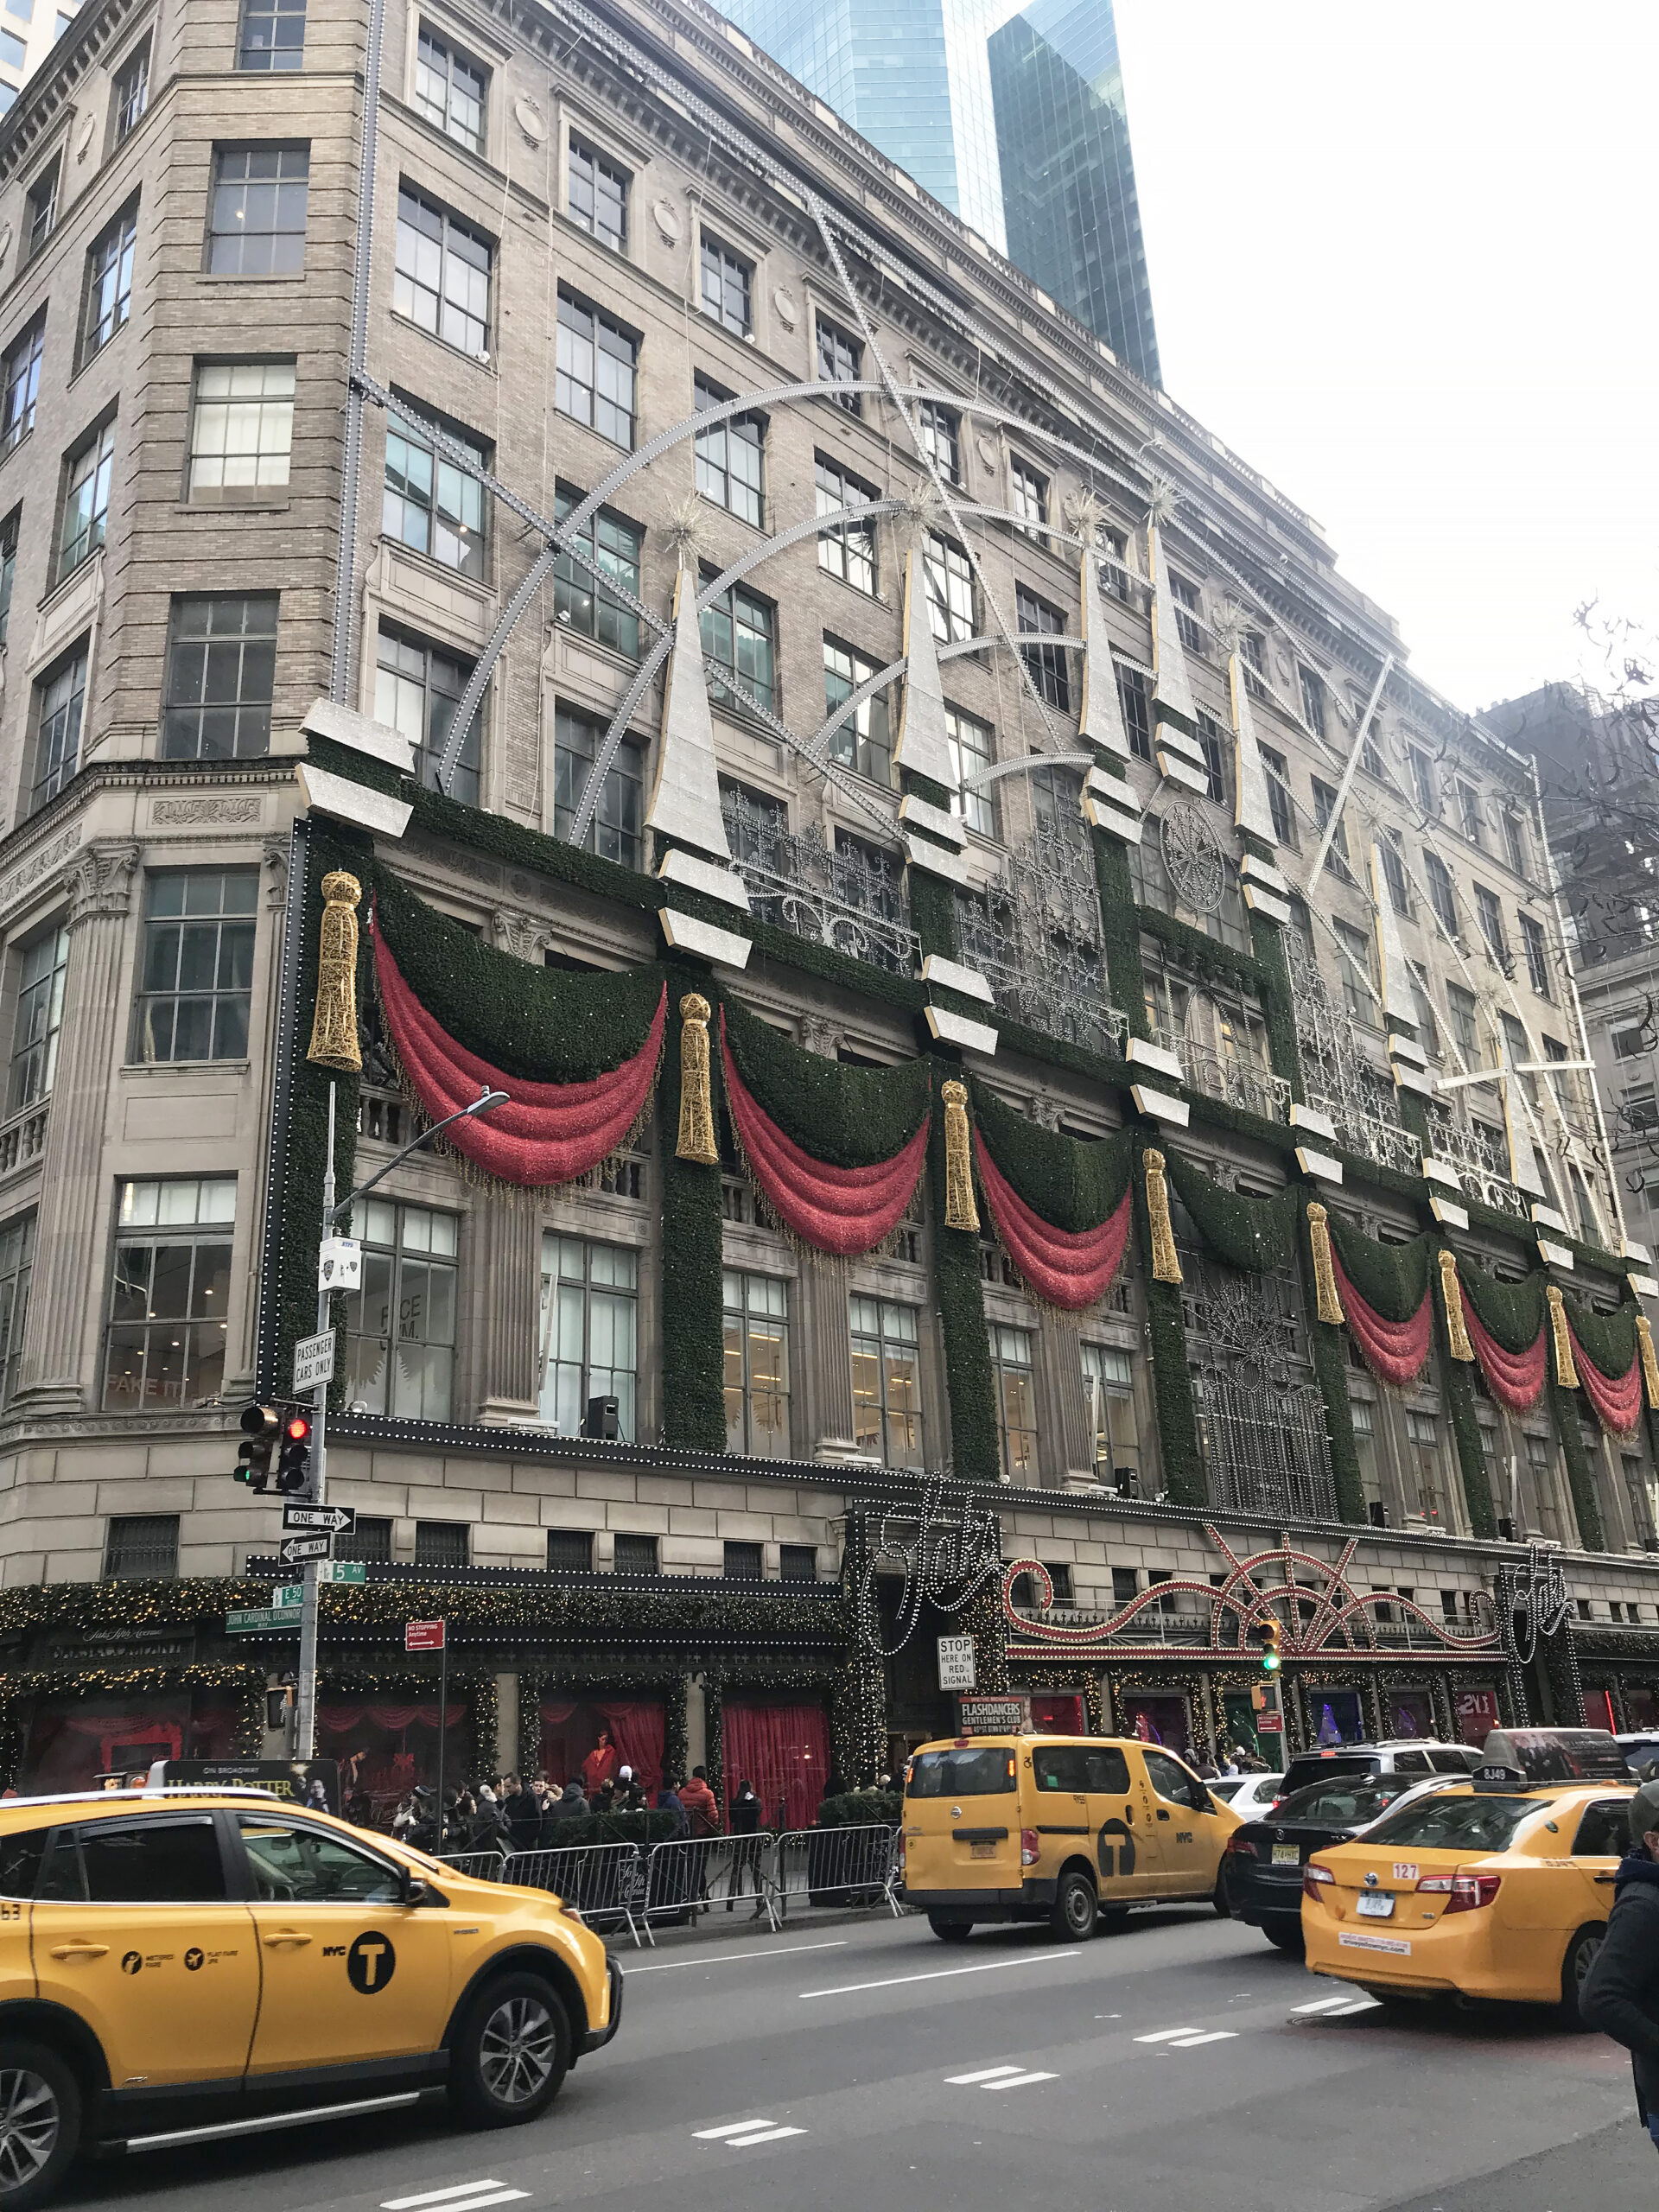 Saks Fifth Avenue Christmas--Our Favorite Things to Do in New York City that will make your trip memorable, festive and of course magical!  Darling Darleen Top Lifestyle blogger